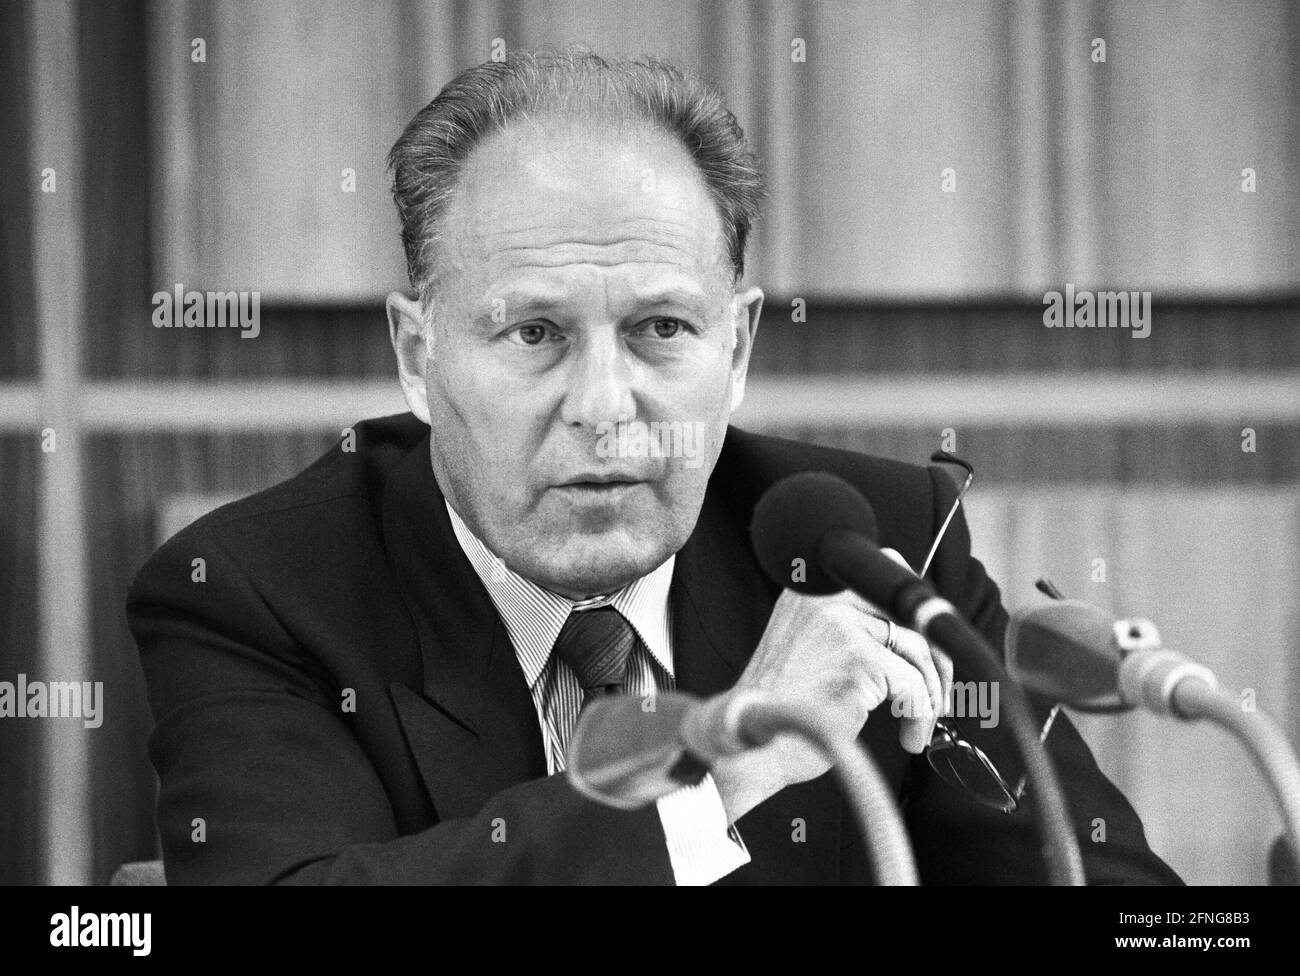 Germany, Bonn, 31.08.1989. Archive No: 08-02-30 Press conference with Minister Warnke Photo: Jürgen Franz Karl Walter Warnke, Federal Minister for Economic Cooperation [automated translation] Stock Photo